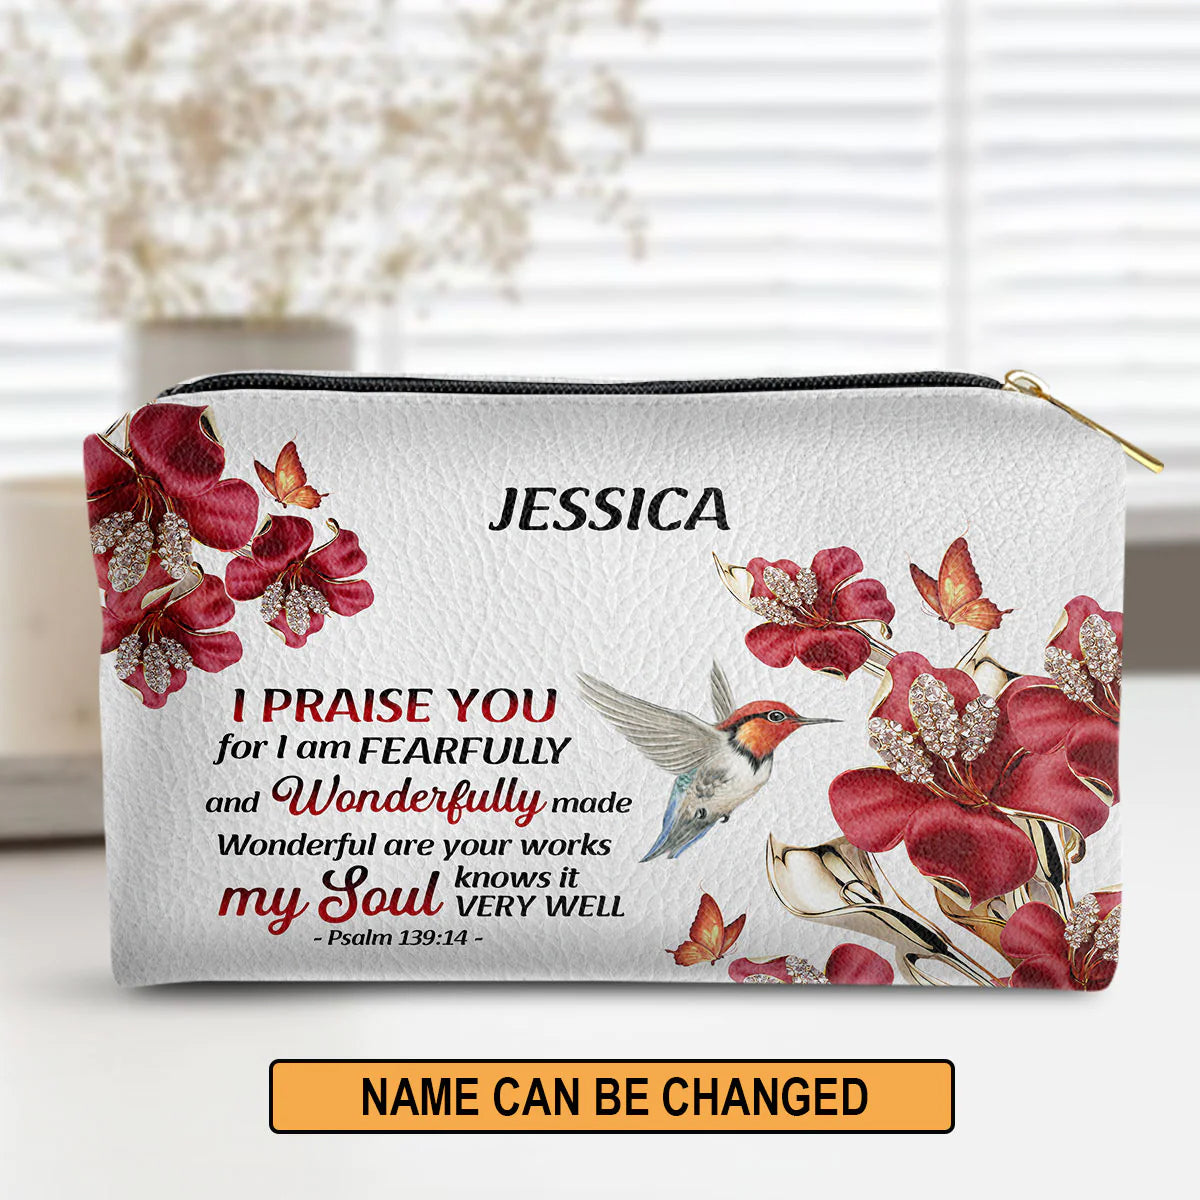 Christianartbag Makeup Cosmetic Bag, My Soul Knows It Very Well, Christmas Gift, Personalized Leather Cosmetic Bag. - Christian Art Bag